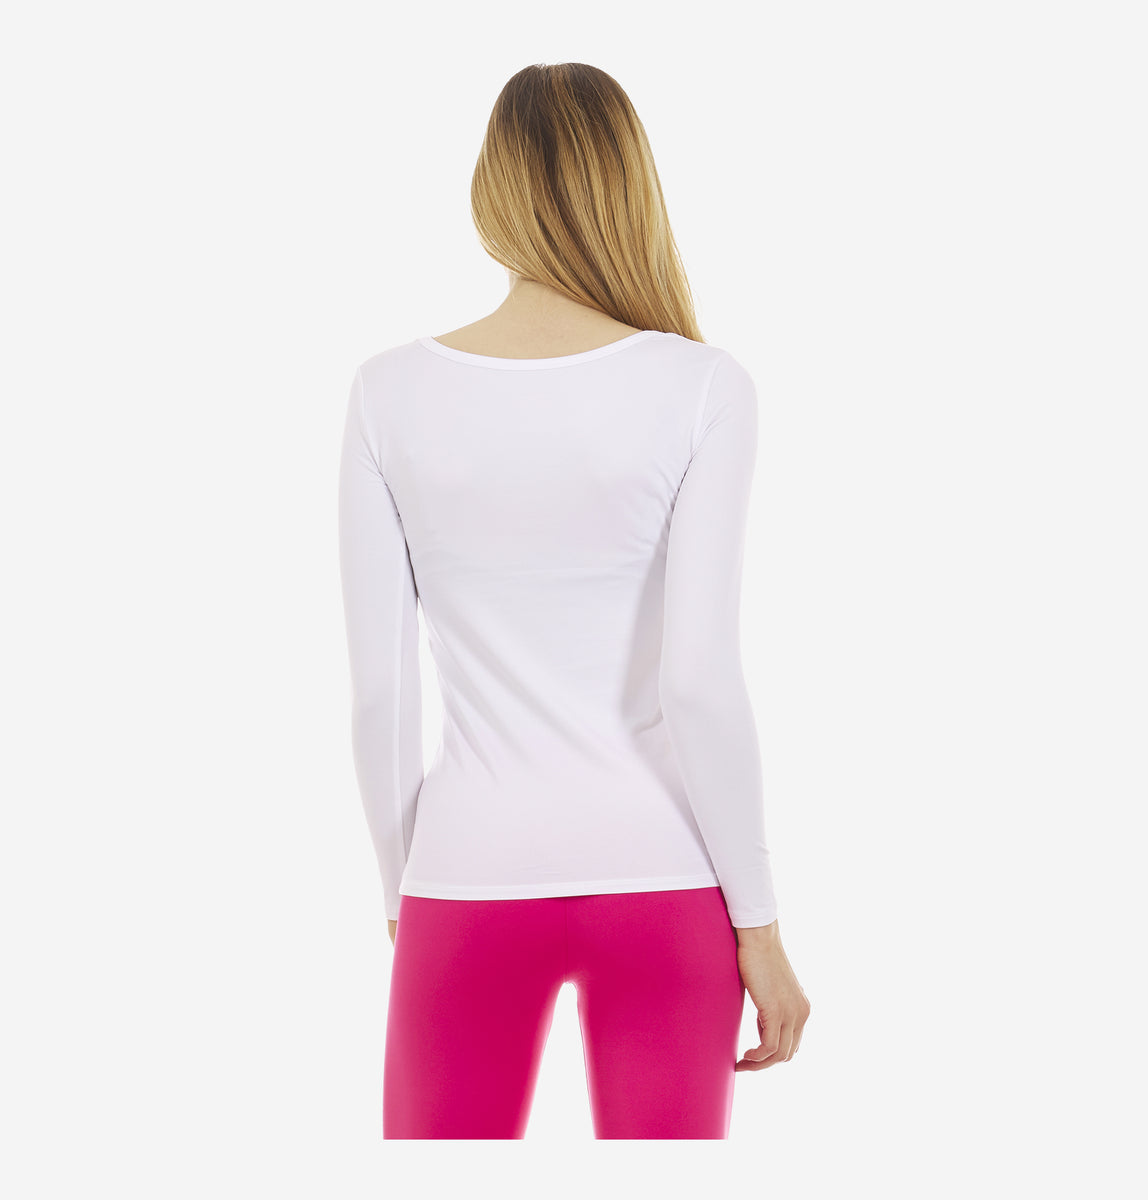 Thermajane Thermal Shirts for Women Long Sleeve Winter Tops Women